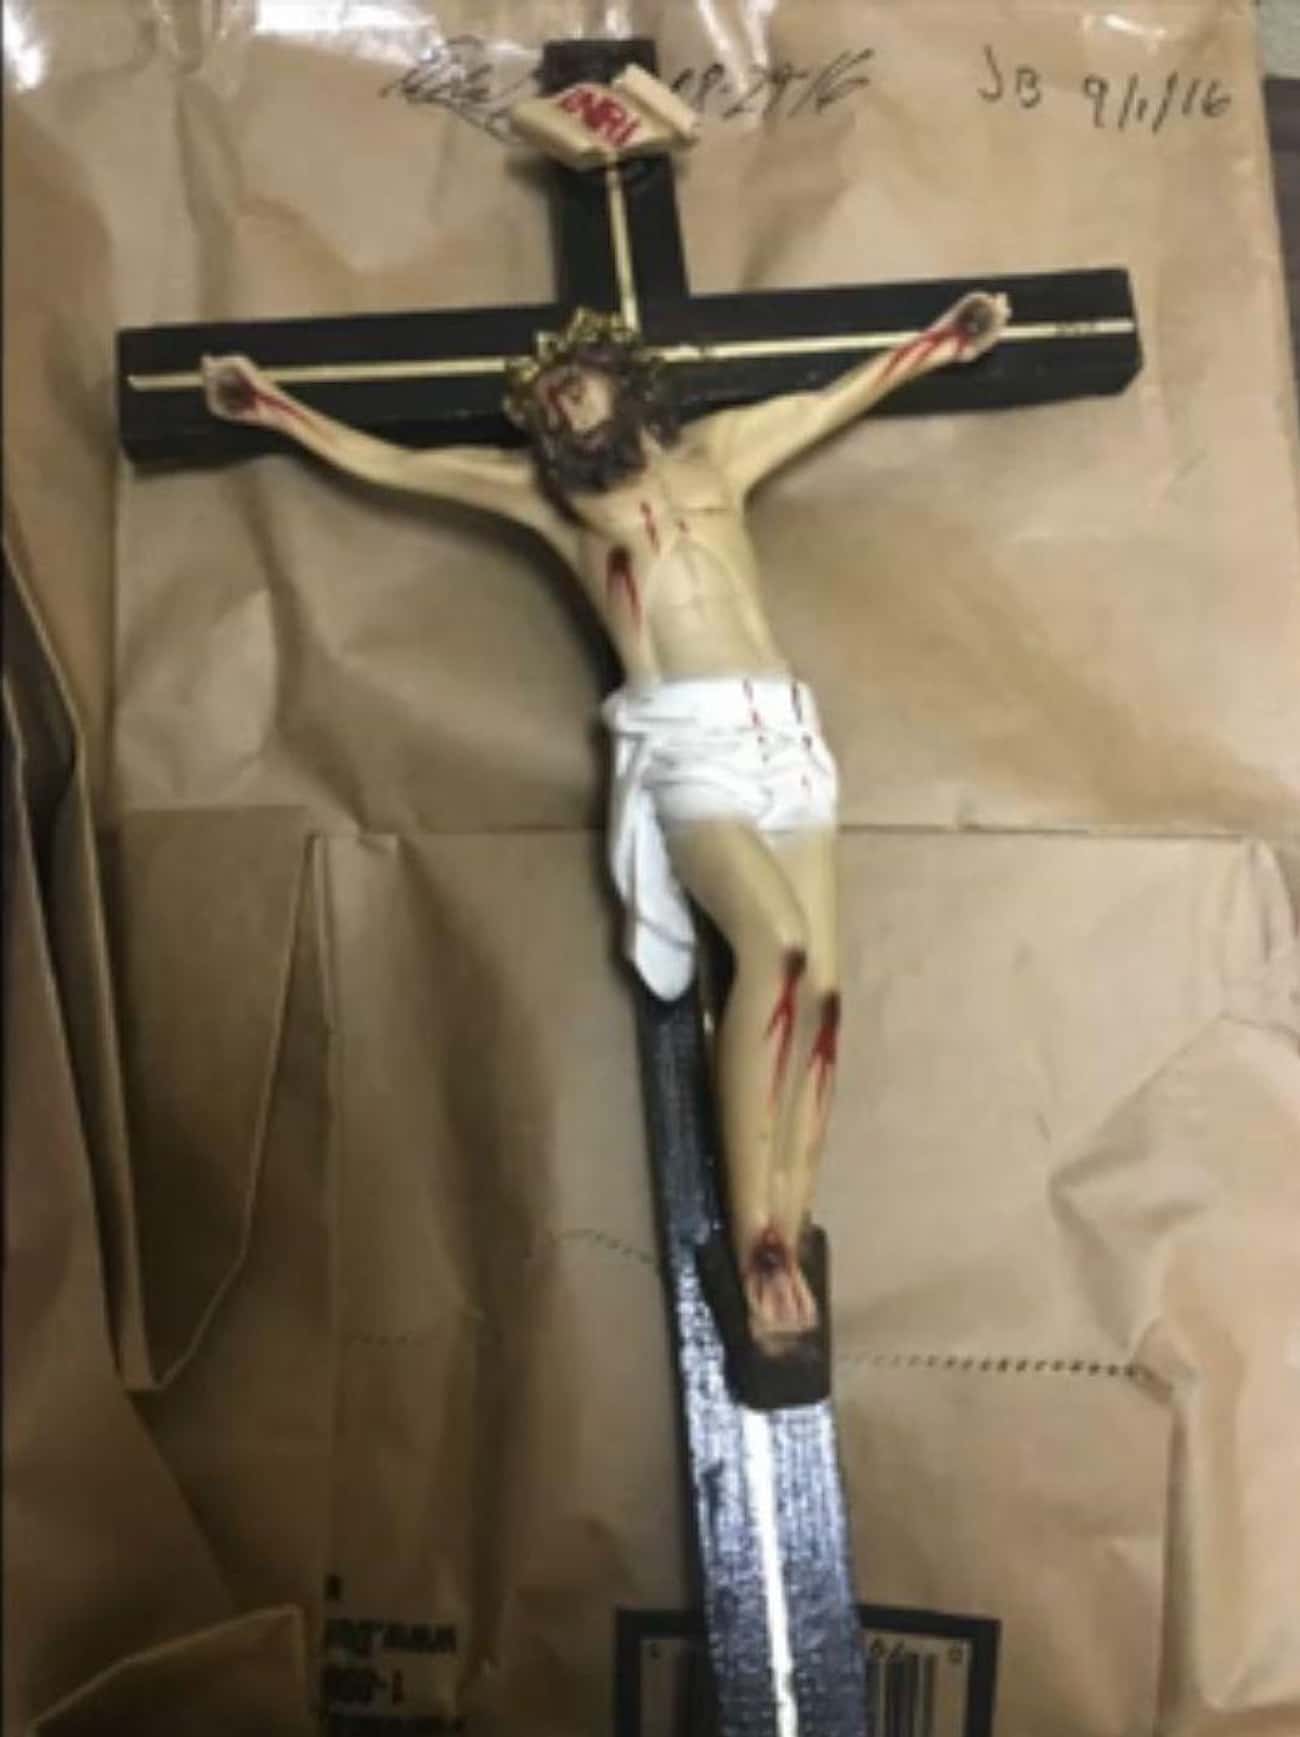 Juanita Posed Her Dead Daughter In The Form Of A Crucifix